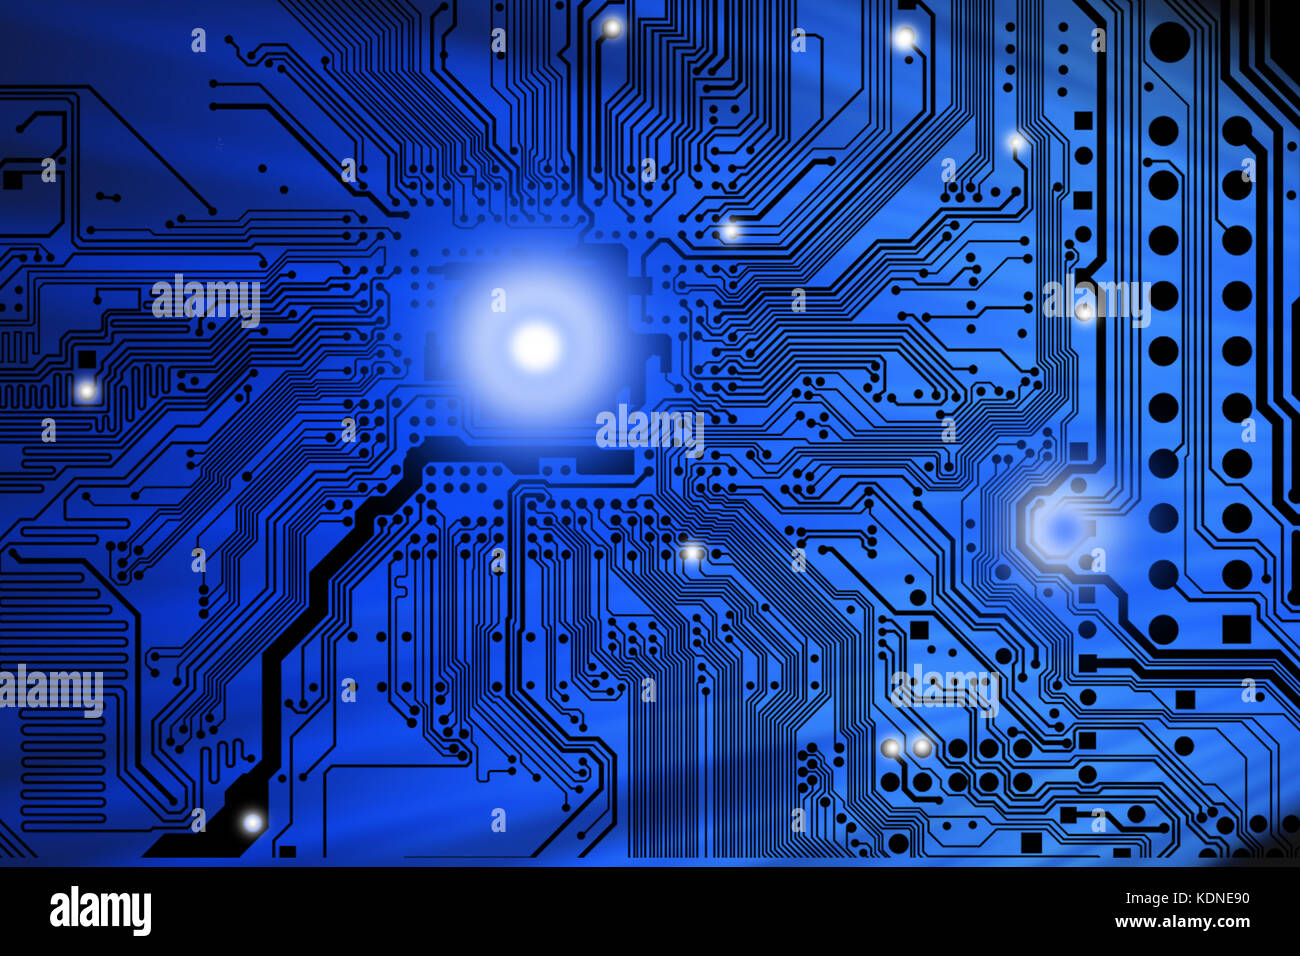 Computer motherboard or electronic circuit board close-up Stock Photo